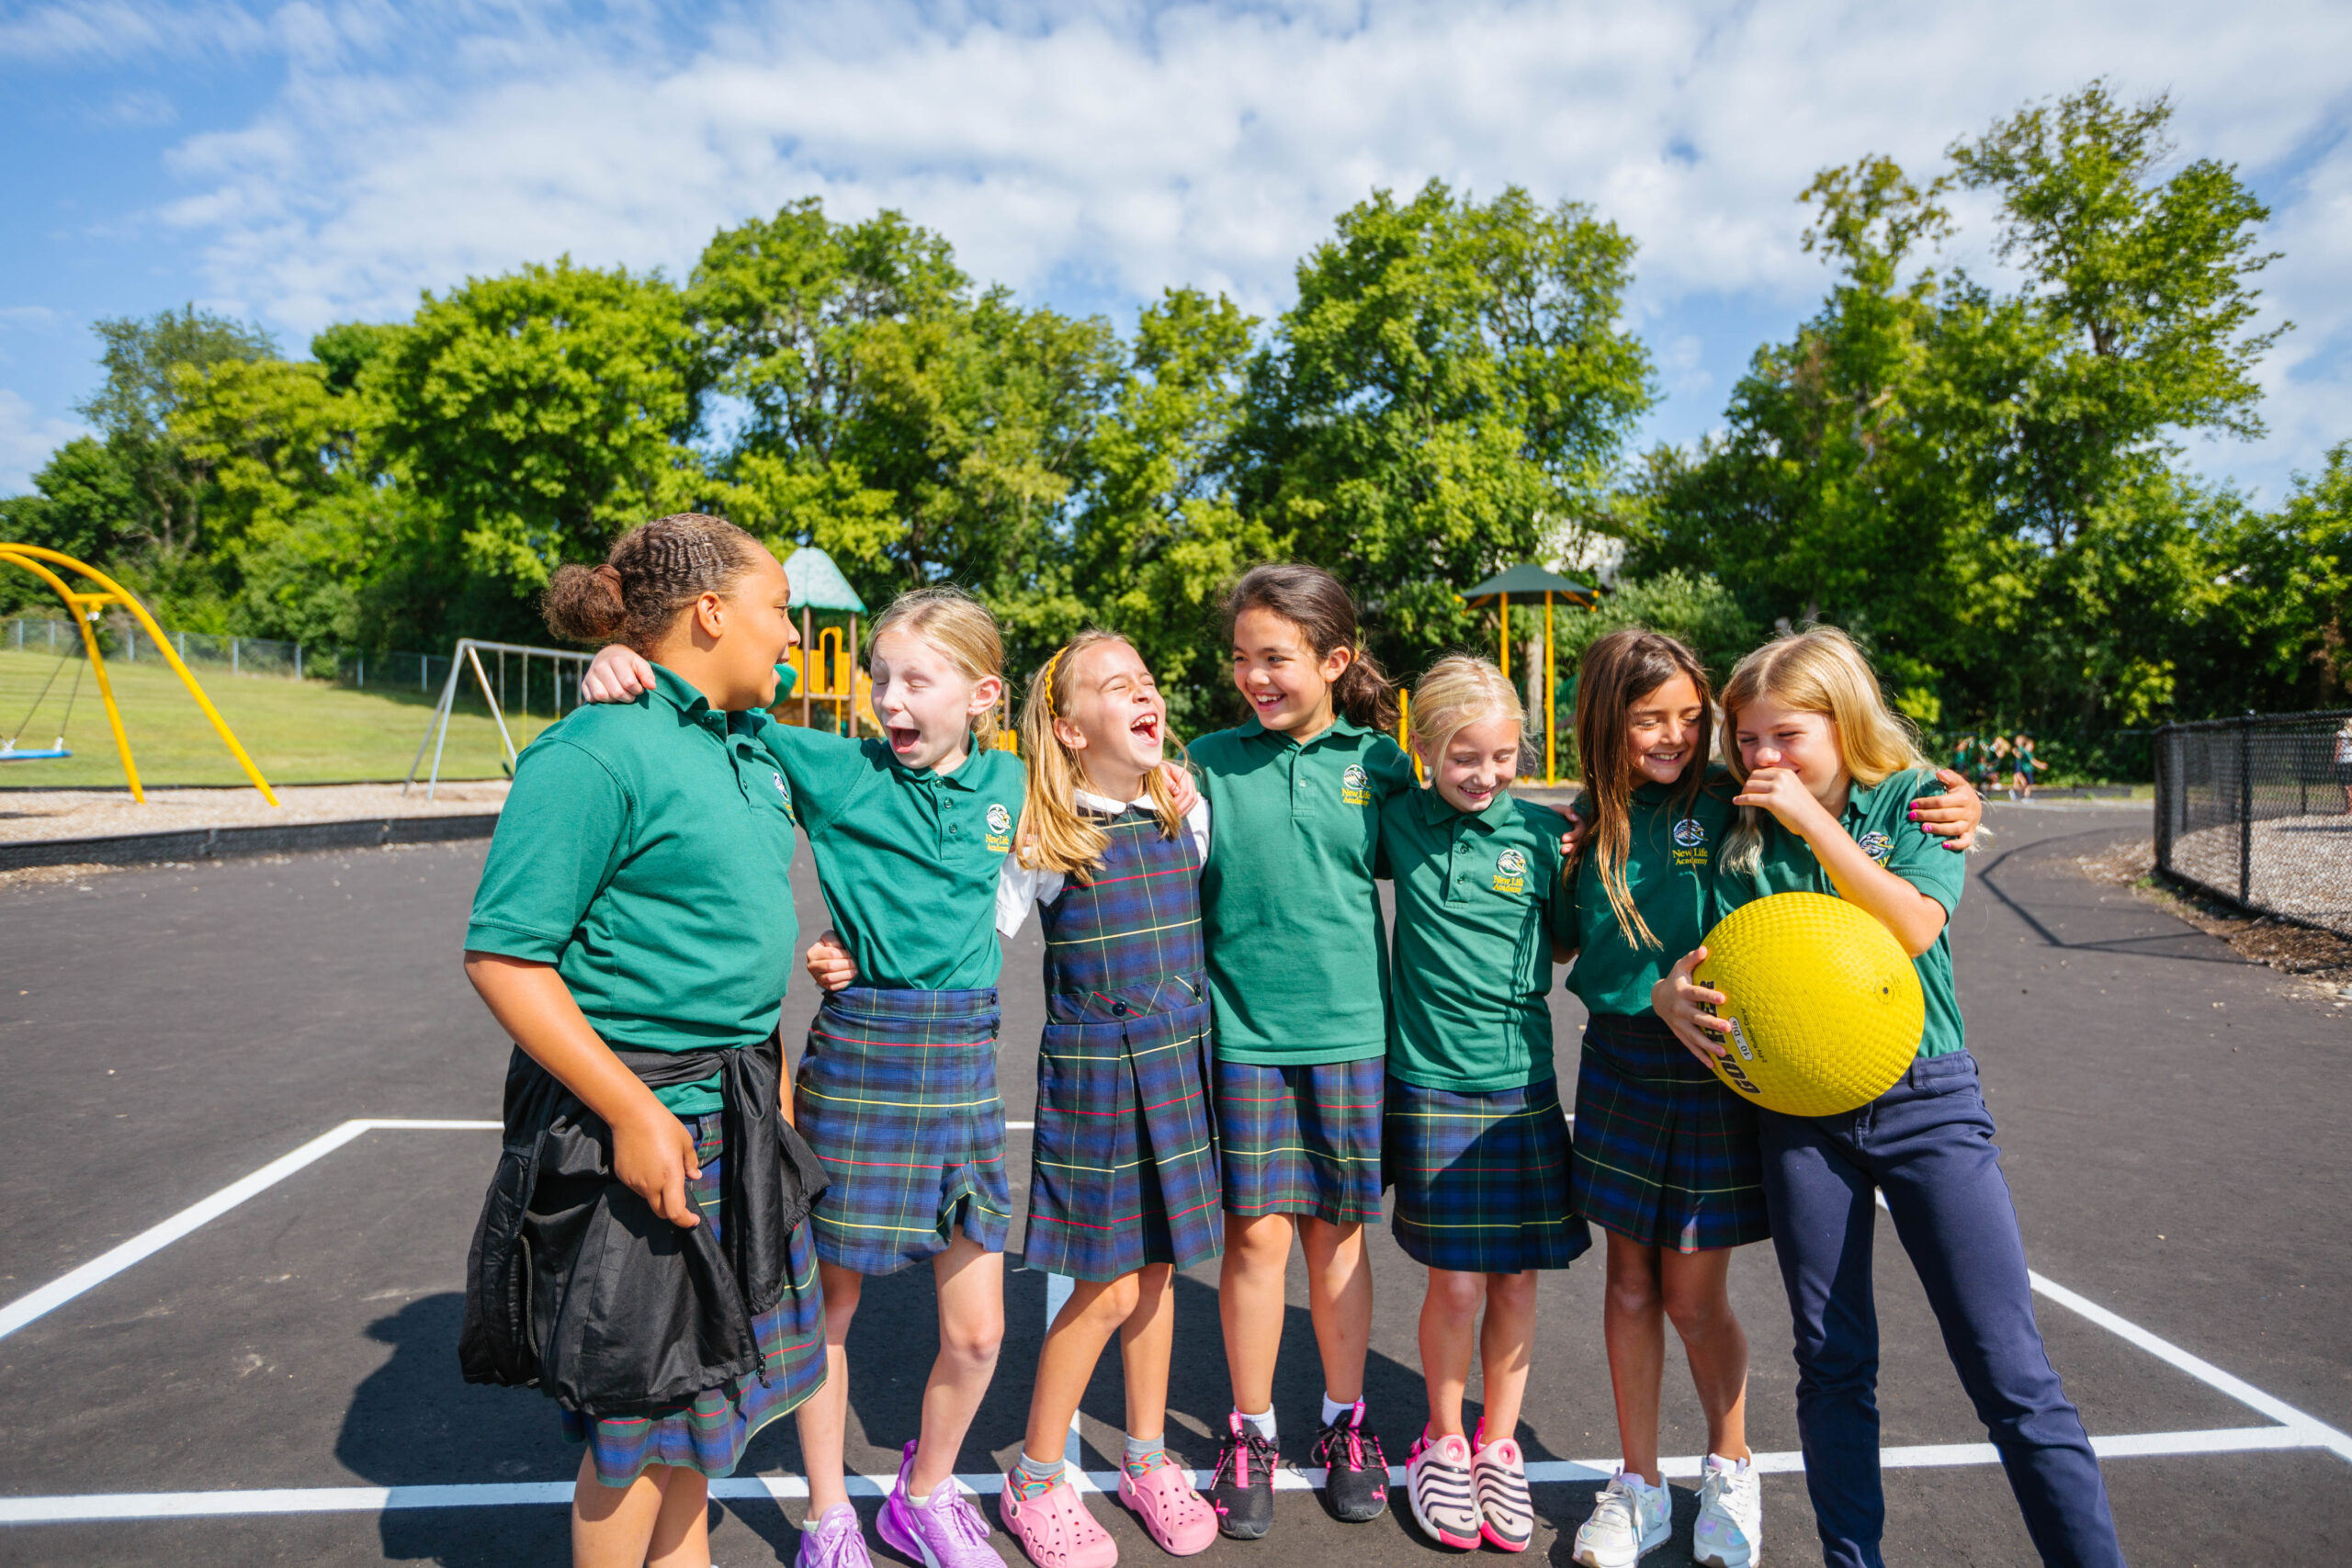 A group of happy girls enjoy a playful moment on the playground.